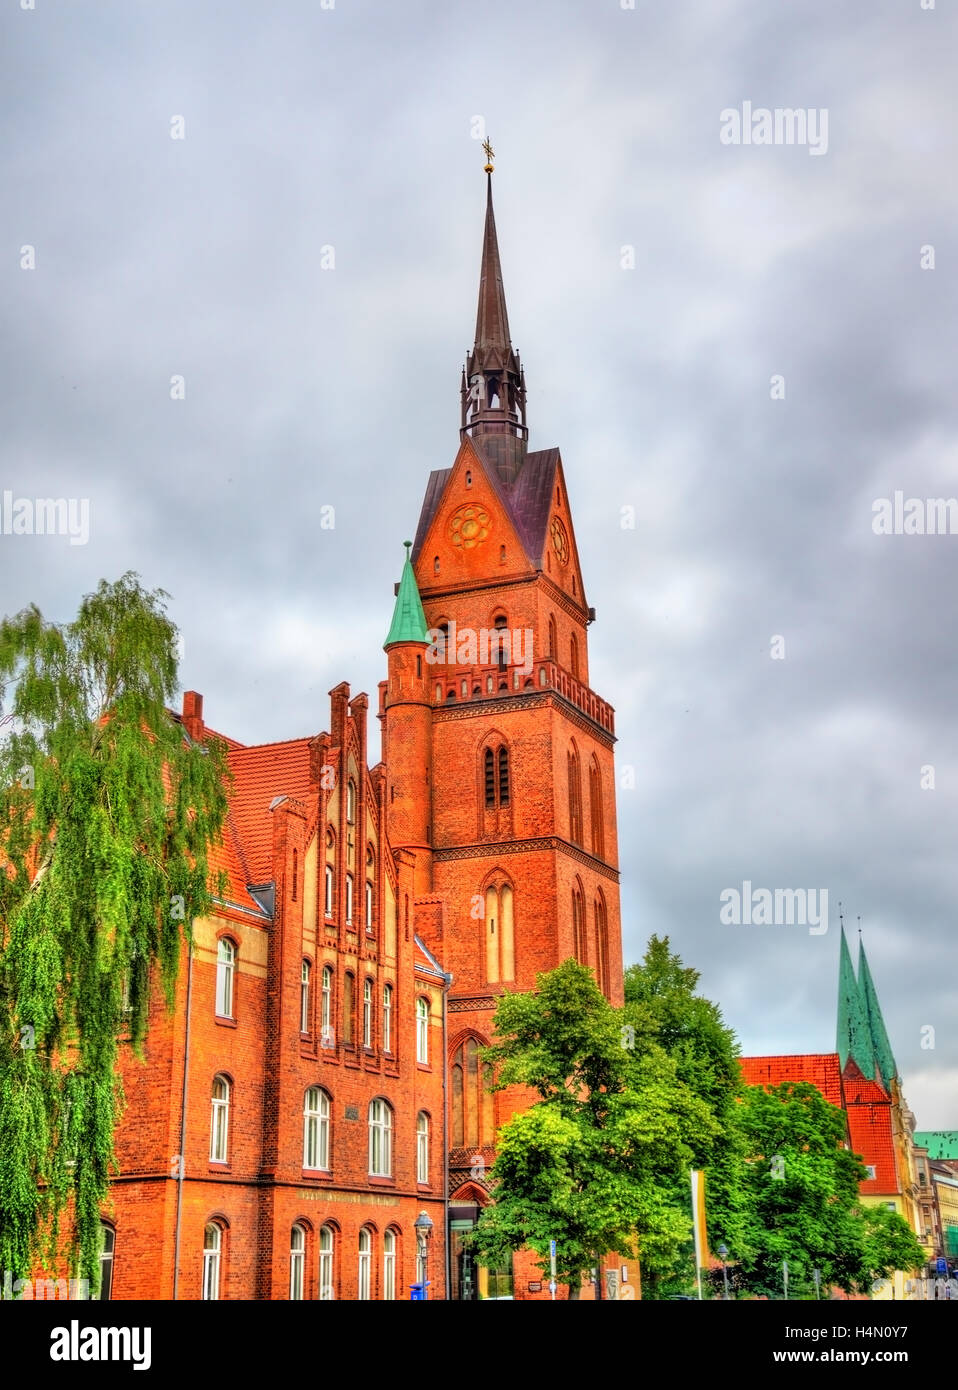 The Sacred Heart Church in Lubeck, Germany Stock Photo